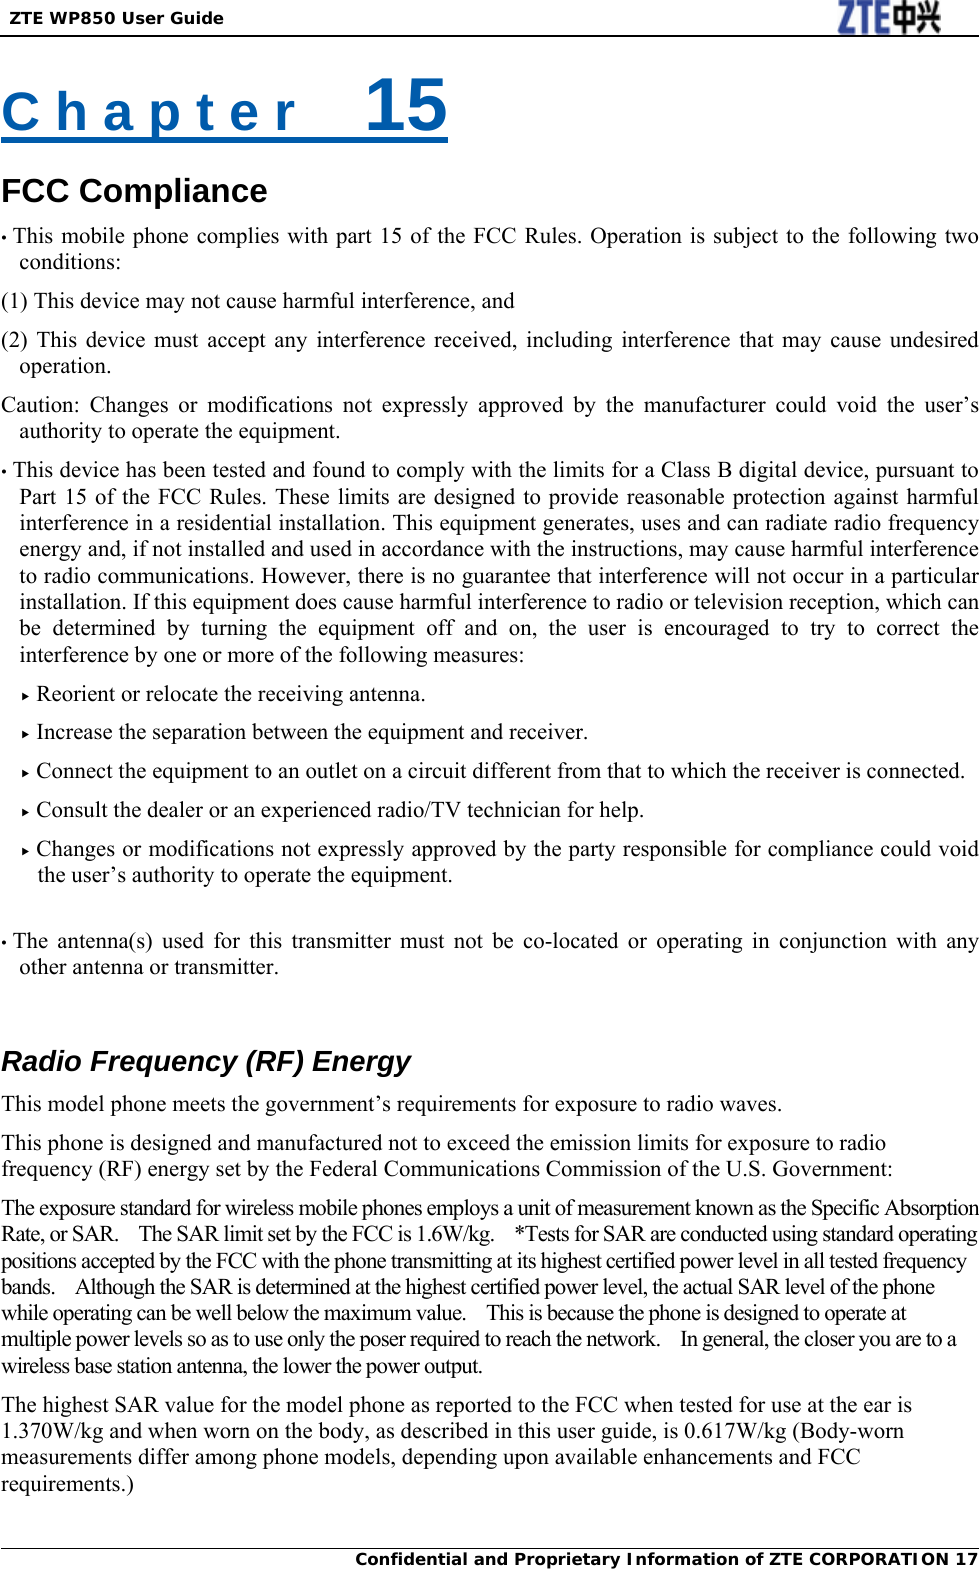  ZTE WP850 User Guide Confidential and Proprietary Information of ZTE CORPORATION 17C h a p t e r    15 FCC Compliance • This mobile phone complies with part 15 of the FCC Rules. Operation is subject to the following two conditions:  (1) This device may not cause harmful interference, and   (2) This device must accept any interference received, including interference that may cause undesired operation. Caution: Changes or modifications not expressly approved by the manufacturer could void the user’s authority to operate the equipment. • This device has been tested and found to comply with the limits for a Class B digital device, pursuant to Part 15 of the FCC Rules. These limits are designed to provide reasonable protection against harmful interference in a residential installation. This equipment generates, uses and can radiate radio frequency energy and, if not installed and used in accordance with the instructions, may cause harmful interference to radio communications. However, there is no guarantee that interference will not occur in a particular installation. If this equipment does cause harmful interference to radio or television reception, which can be determined by turning the equipment off and on, the user is encouraged to try to correct the interference by one or more of the following measures: f Reorient or relocate the receiving antenna. f Increase the separation between the equipment and receiver. f Connect the equipment to an outlet on a circuit different from that to which the receiver is connected. f Consult the dealer or an experienced radio/TV technician for help. f Changes or modifications not expressly approved by the party responsible for compliance could void the user’s authority to operate the equipment.  • The antenna(s) used for this transmitter must not be co-located or operating in conjunction with any other antenna or transmitter.  Radio Frequency (RF) Energy This model phone meets the government’s requirements for exposure to radio waves. This phone is designed and manufactured not to exceed the emission limits for exposure to radio frequency (RF) energy set by the Federal Communications Commission of the U.S. Government: The exposure standard for wireless mobile phones employs a unit of measurement known as the Specific Absorption Rate, or SAR.    The SAR limit set by the FCC is 1.6W/kg.    *Tests for SAR are conducted using standard operating positions accepted by the FCC with the phone transmitting at its highest certified power level in all tested frequency bands.    Although the SAR is determined at the highest certified power level, the actual SAR level of the phone while operating can be well below the maximum value.  This is because the phone is designed to operate at multiple power levels so as to use only the poser required to reach the network.    In general, the closer you are to a wireless base station antenna, the lower the power output. The highest SAR value for the model phone as reported to the FCC when tested for use at the ear is 1.370W/kg and when worn on the body, as described in this user guide, is 0.617W/kg (Body-worn measurements differ among phone models, depending upon available enhancements and FCC requirements.) 